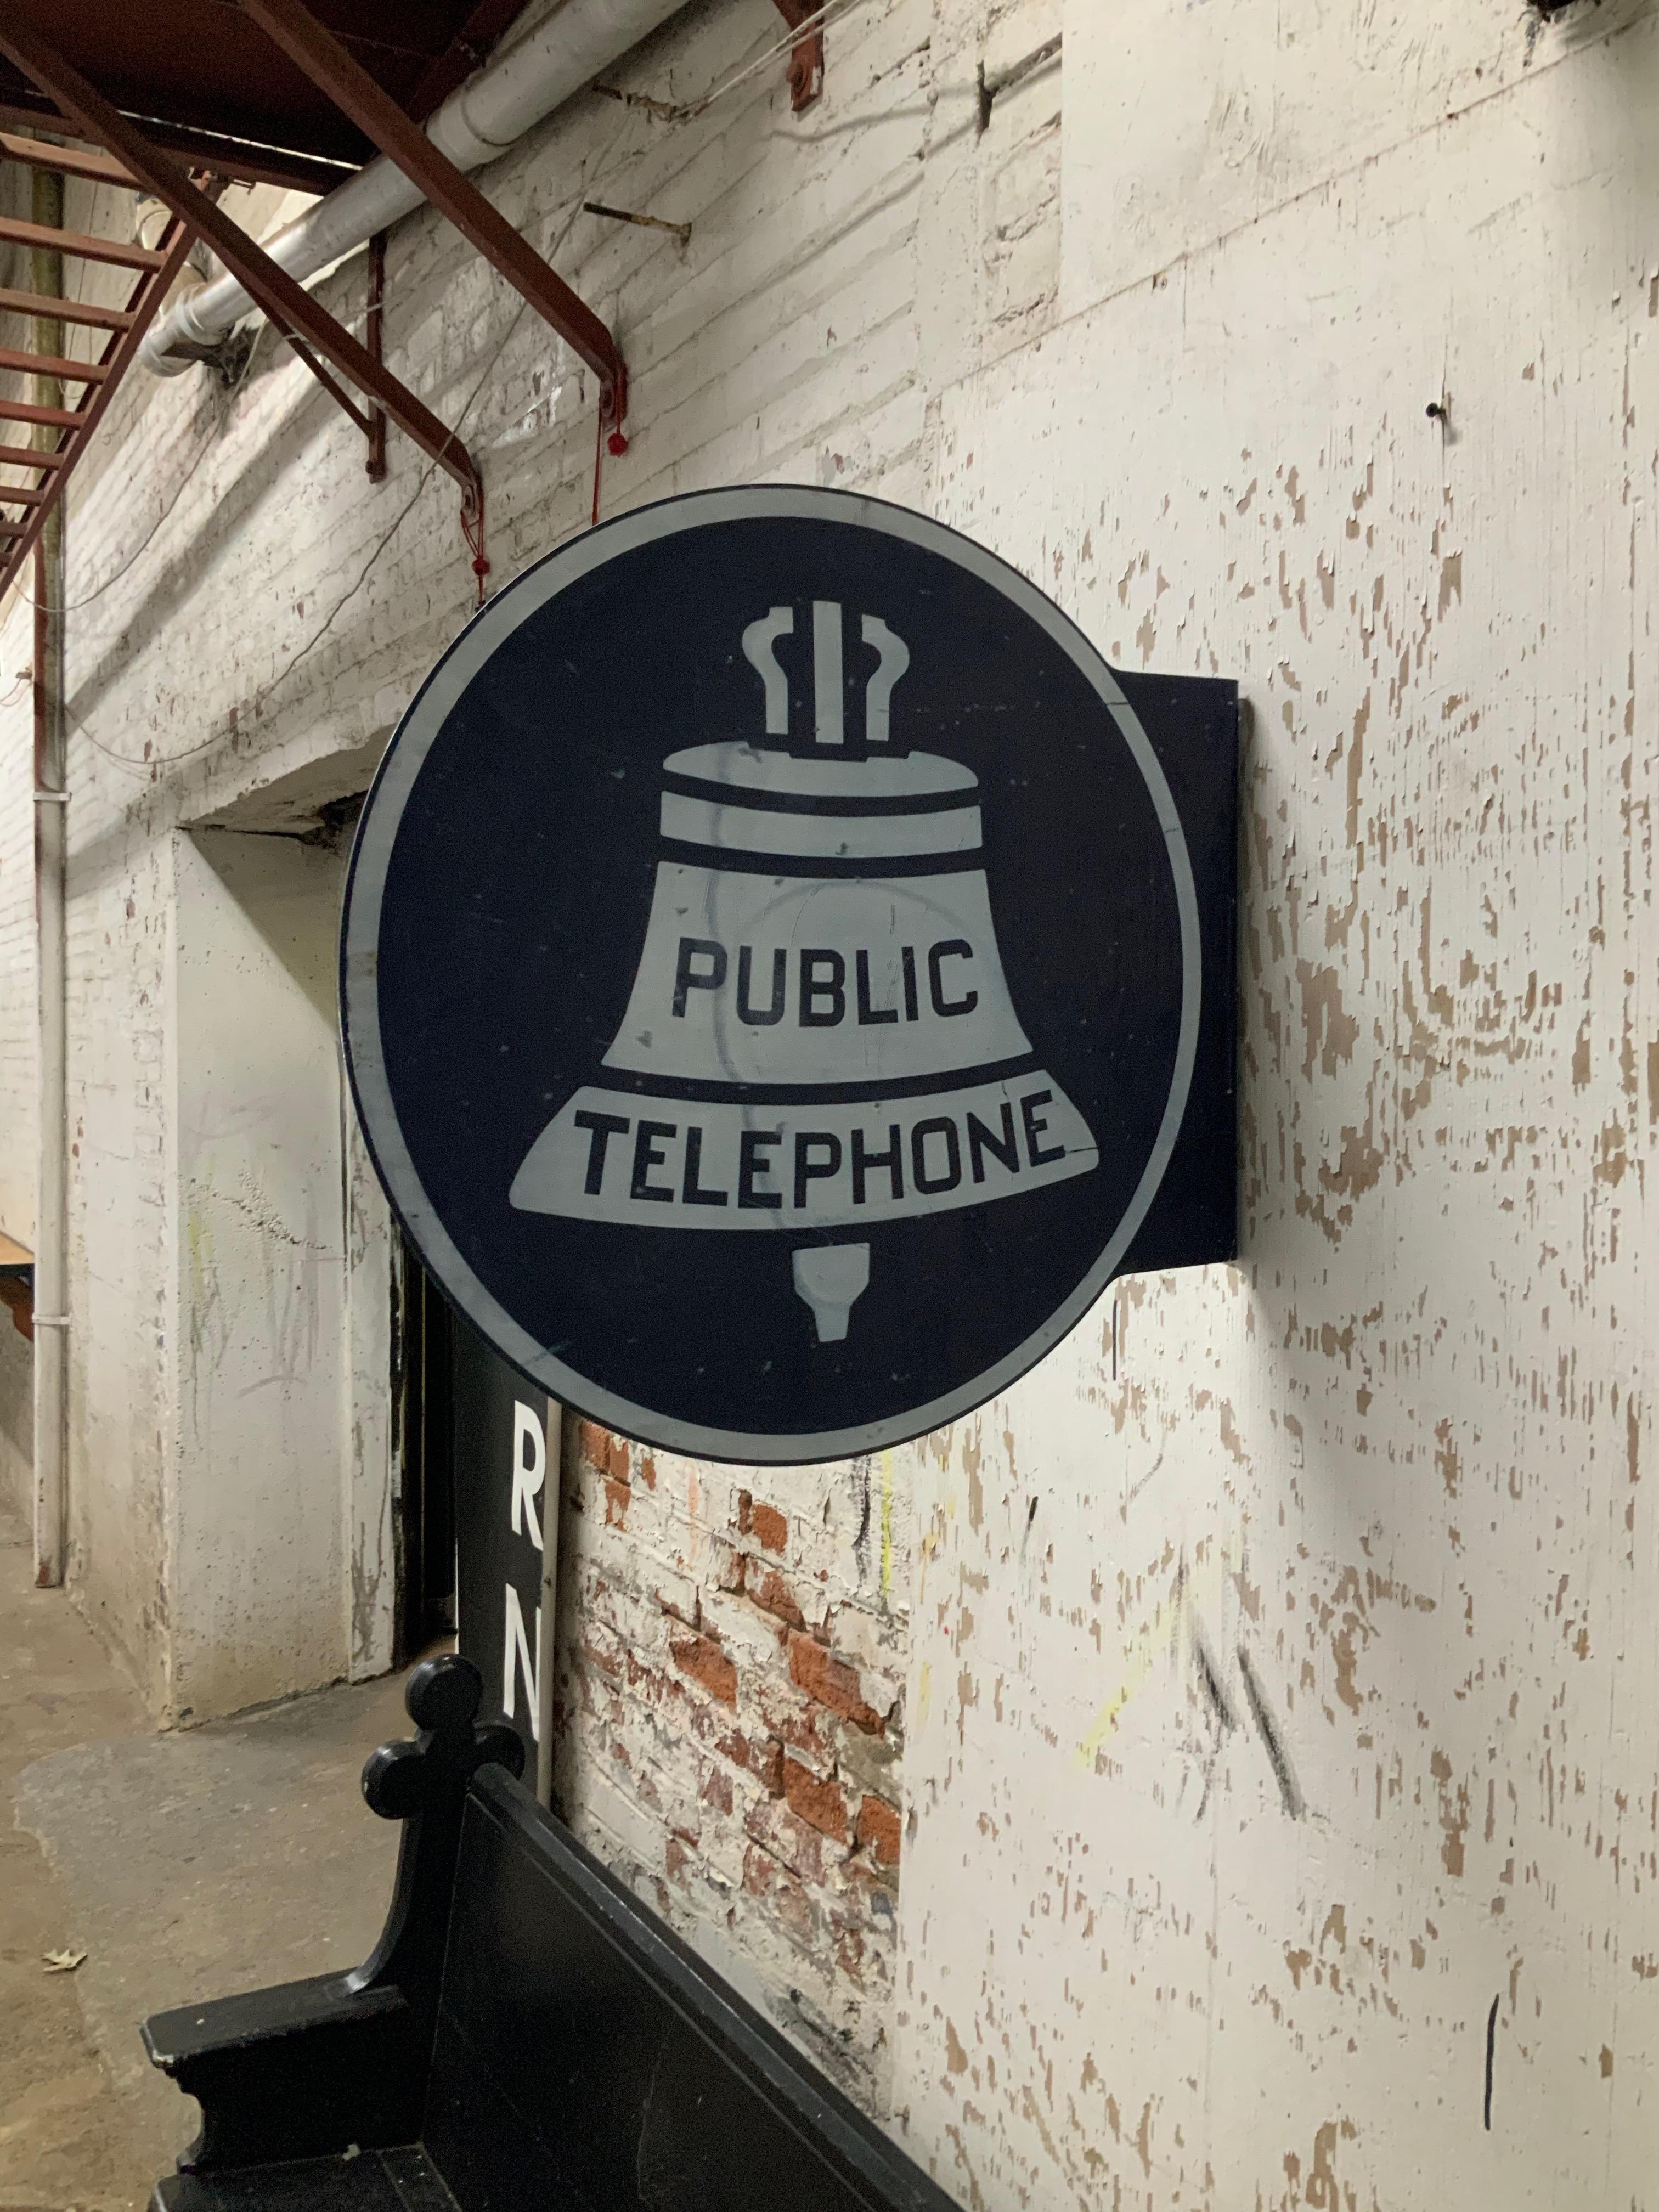 Porcelain enamel round Public Phone sign, circa 1940-1950. Round double side flanged sign with grommets that would attach the sign to a phone booth. Wear commensurate with age and exposure to the elements. Some light scratches and